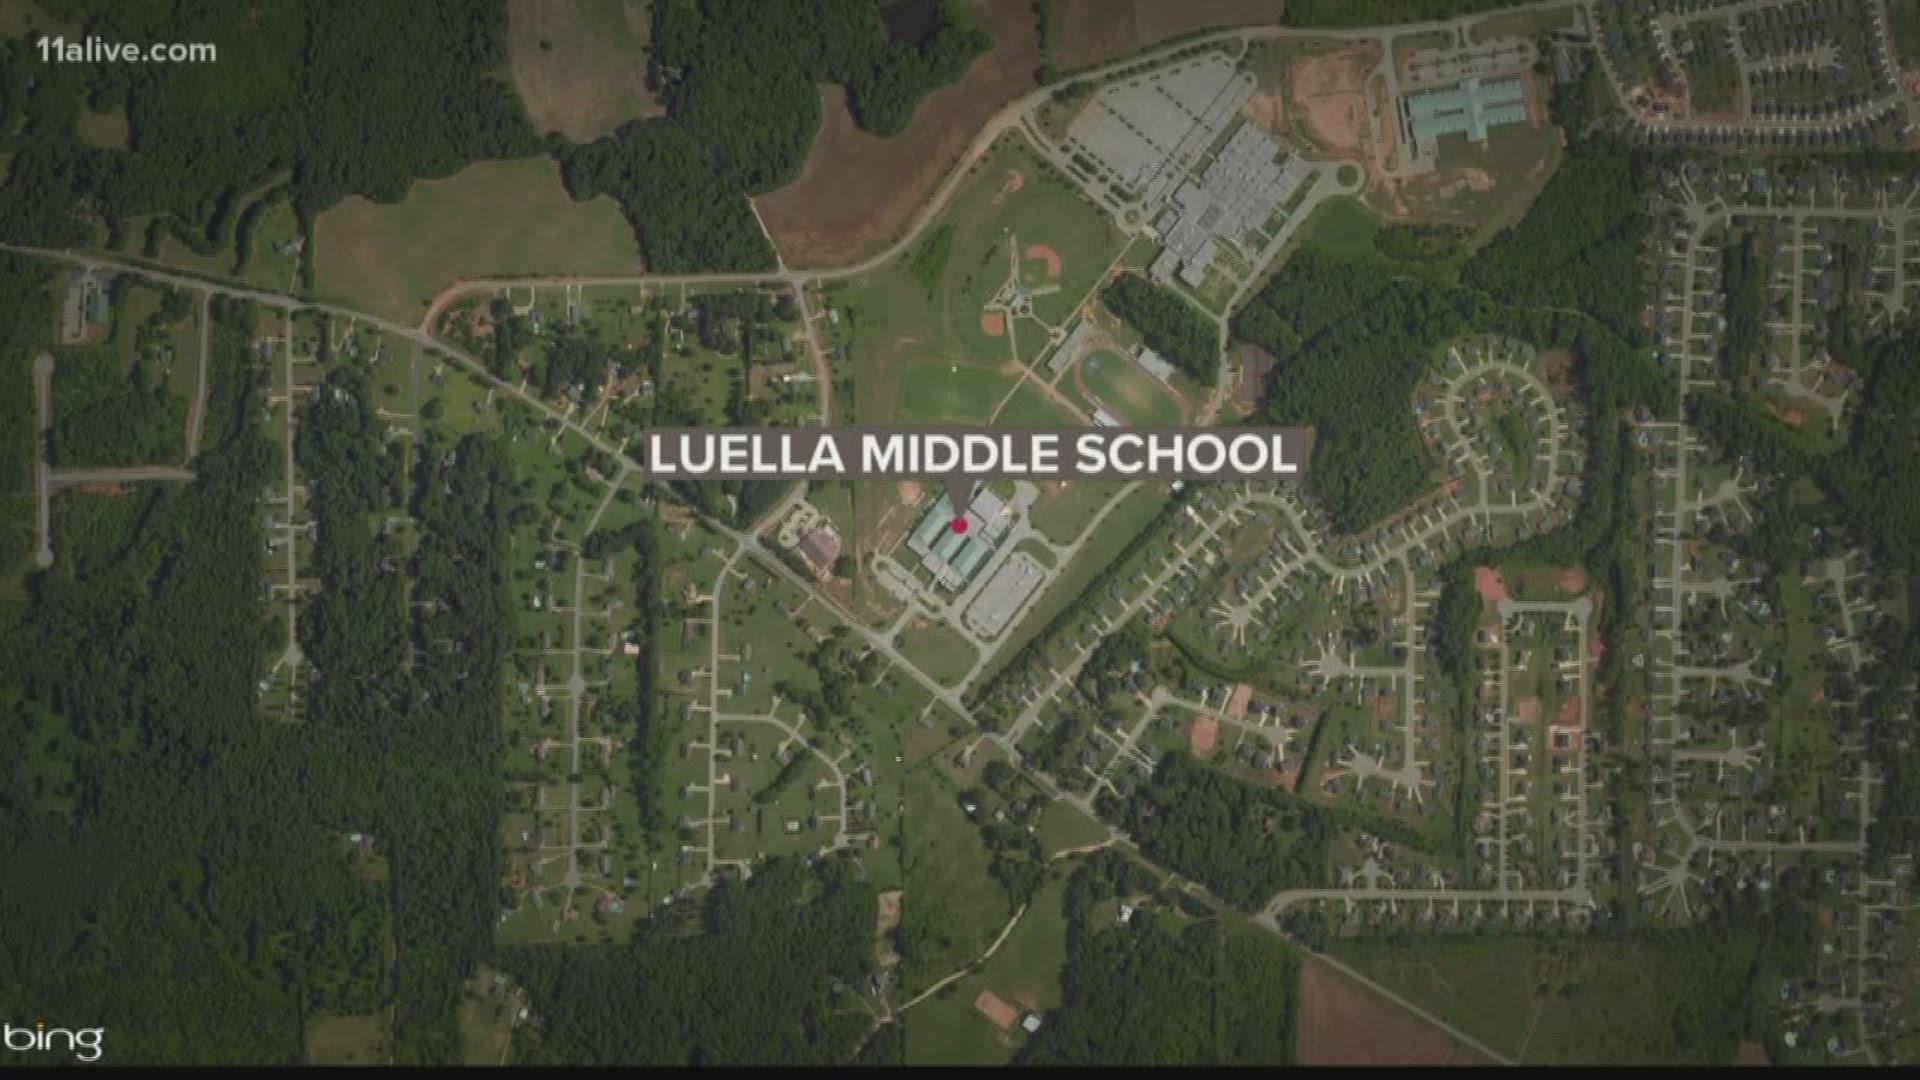 Officials said they were following up on reports that a Luella Middle School student had a weapon. They soon found the reports to be true.